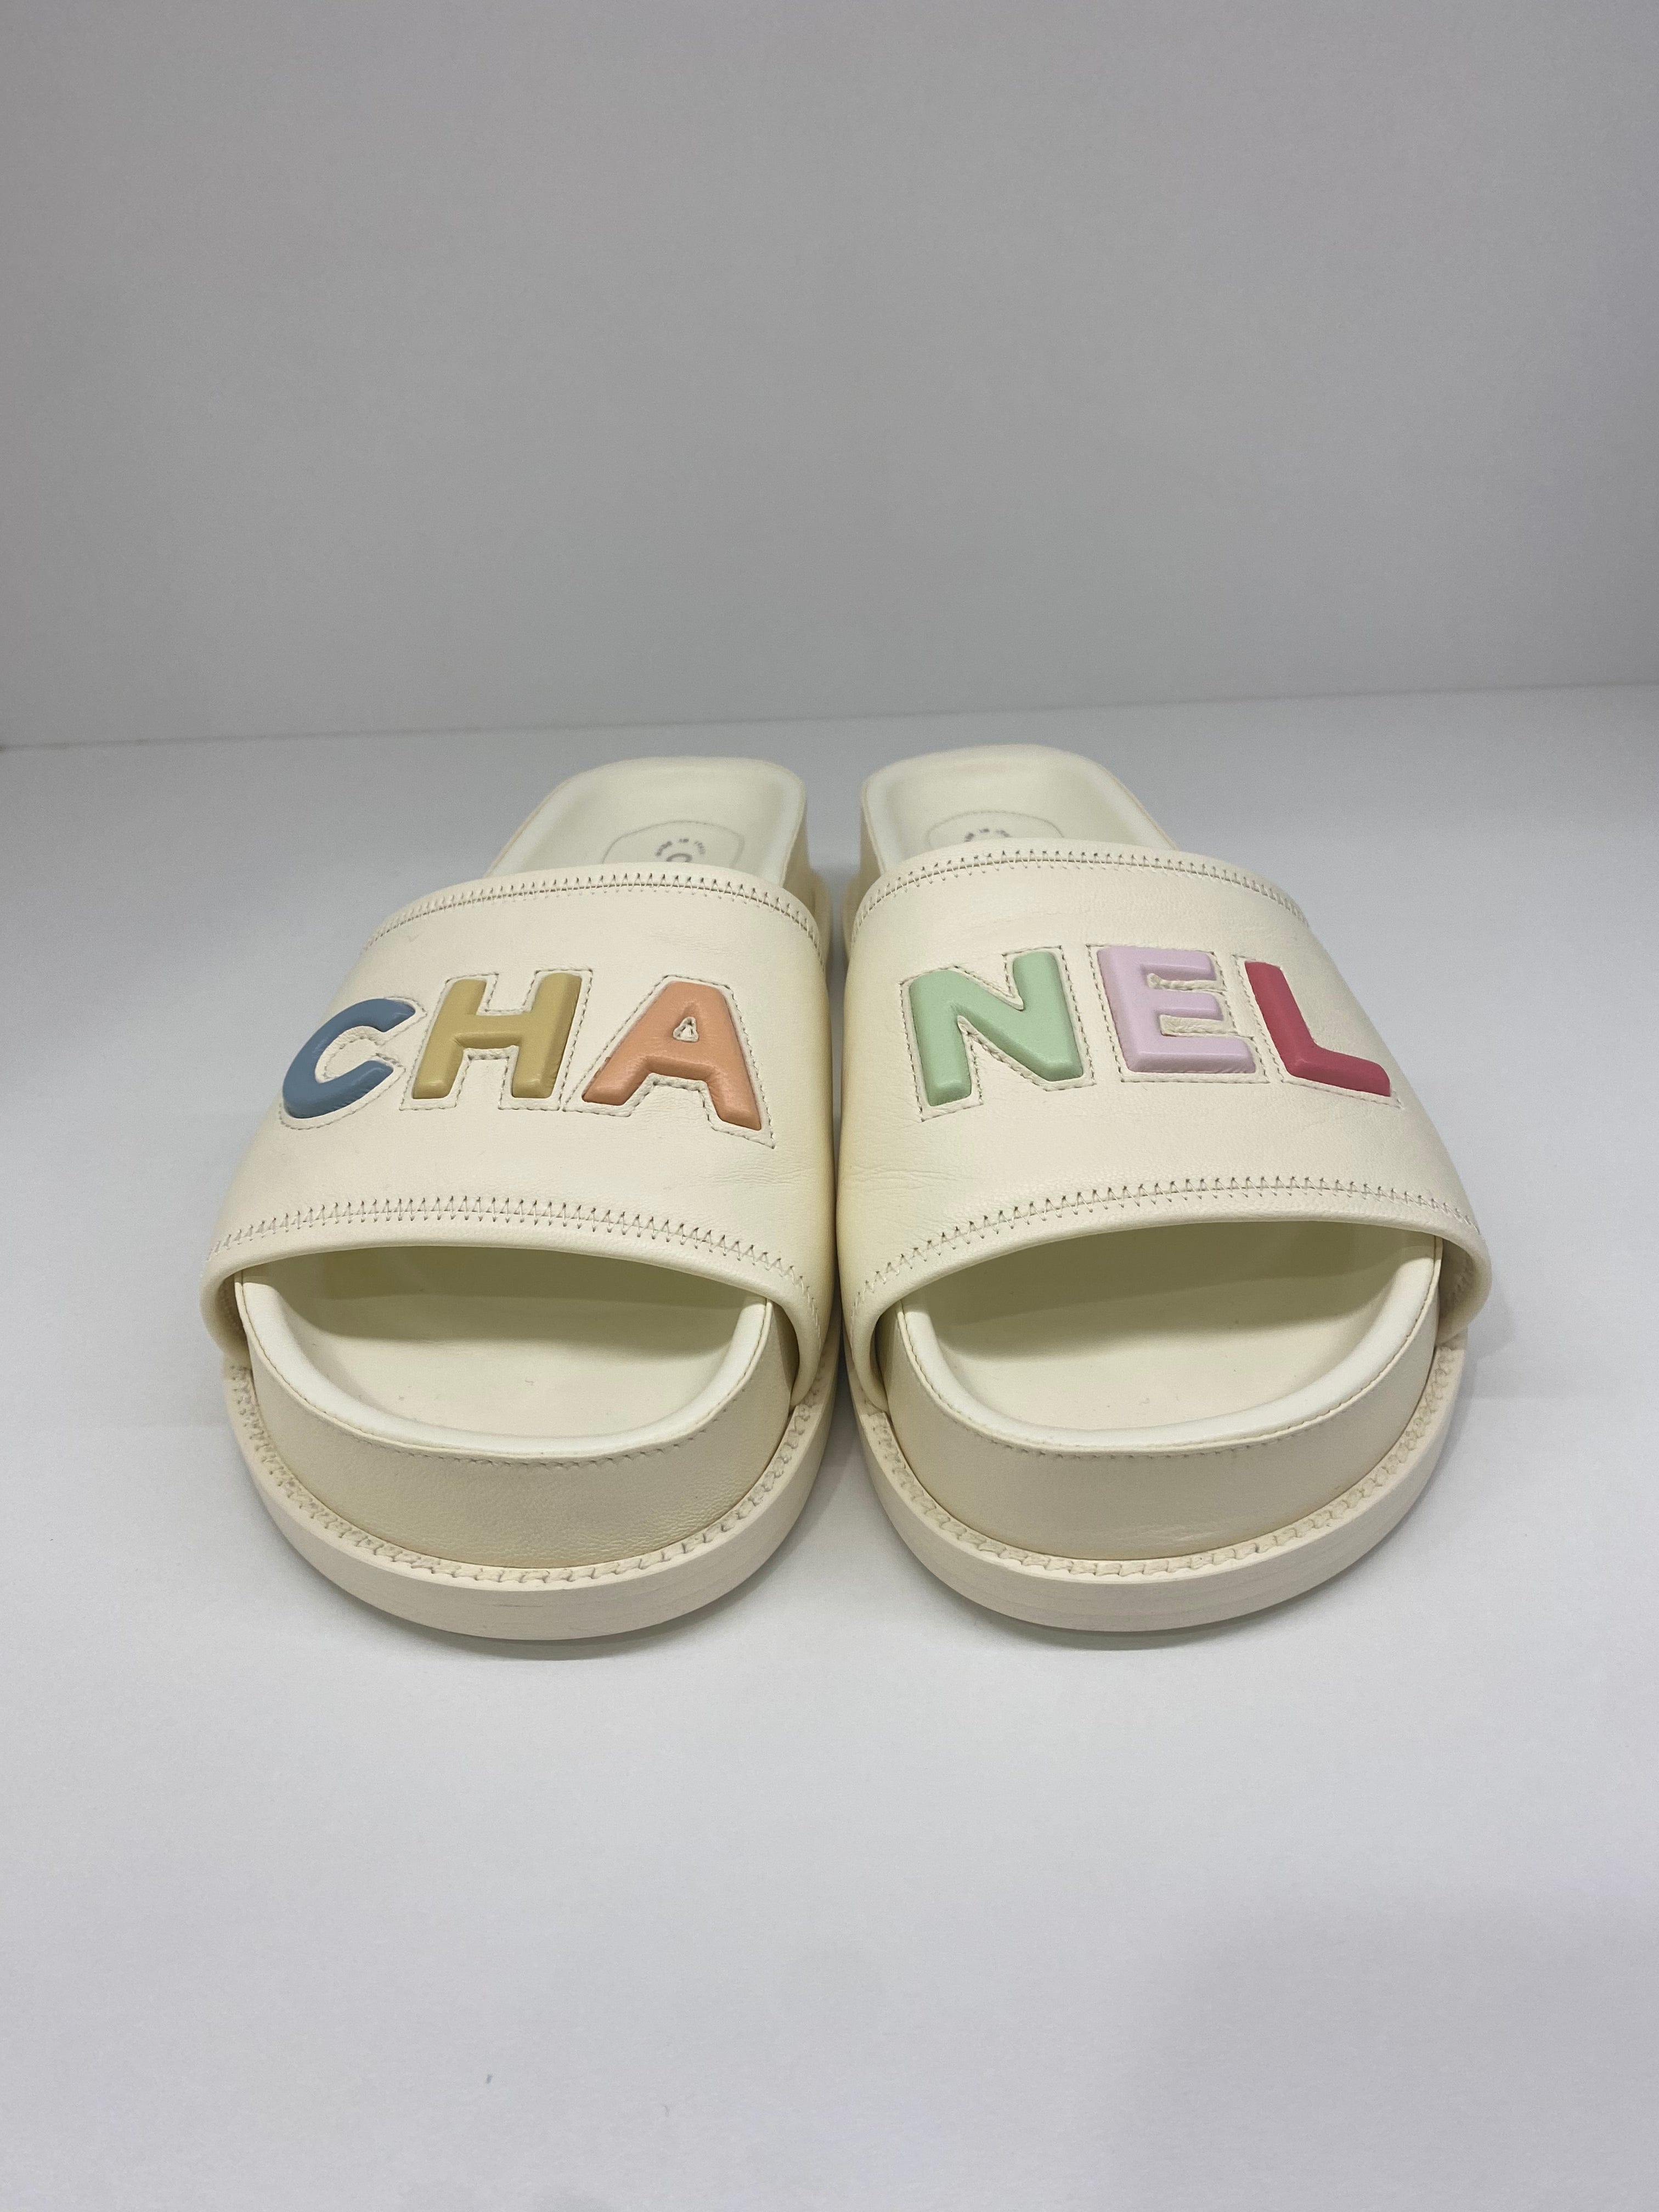 PH Luxury Consignment Chanel Rainbow and White Slides - Size 41